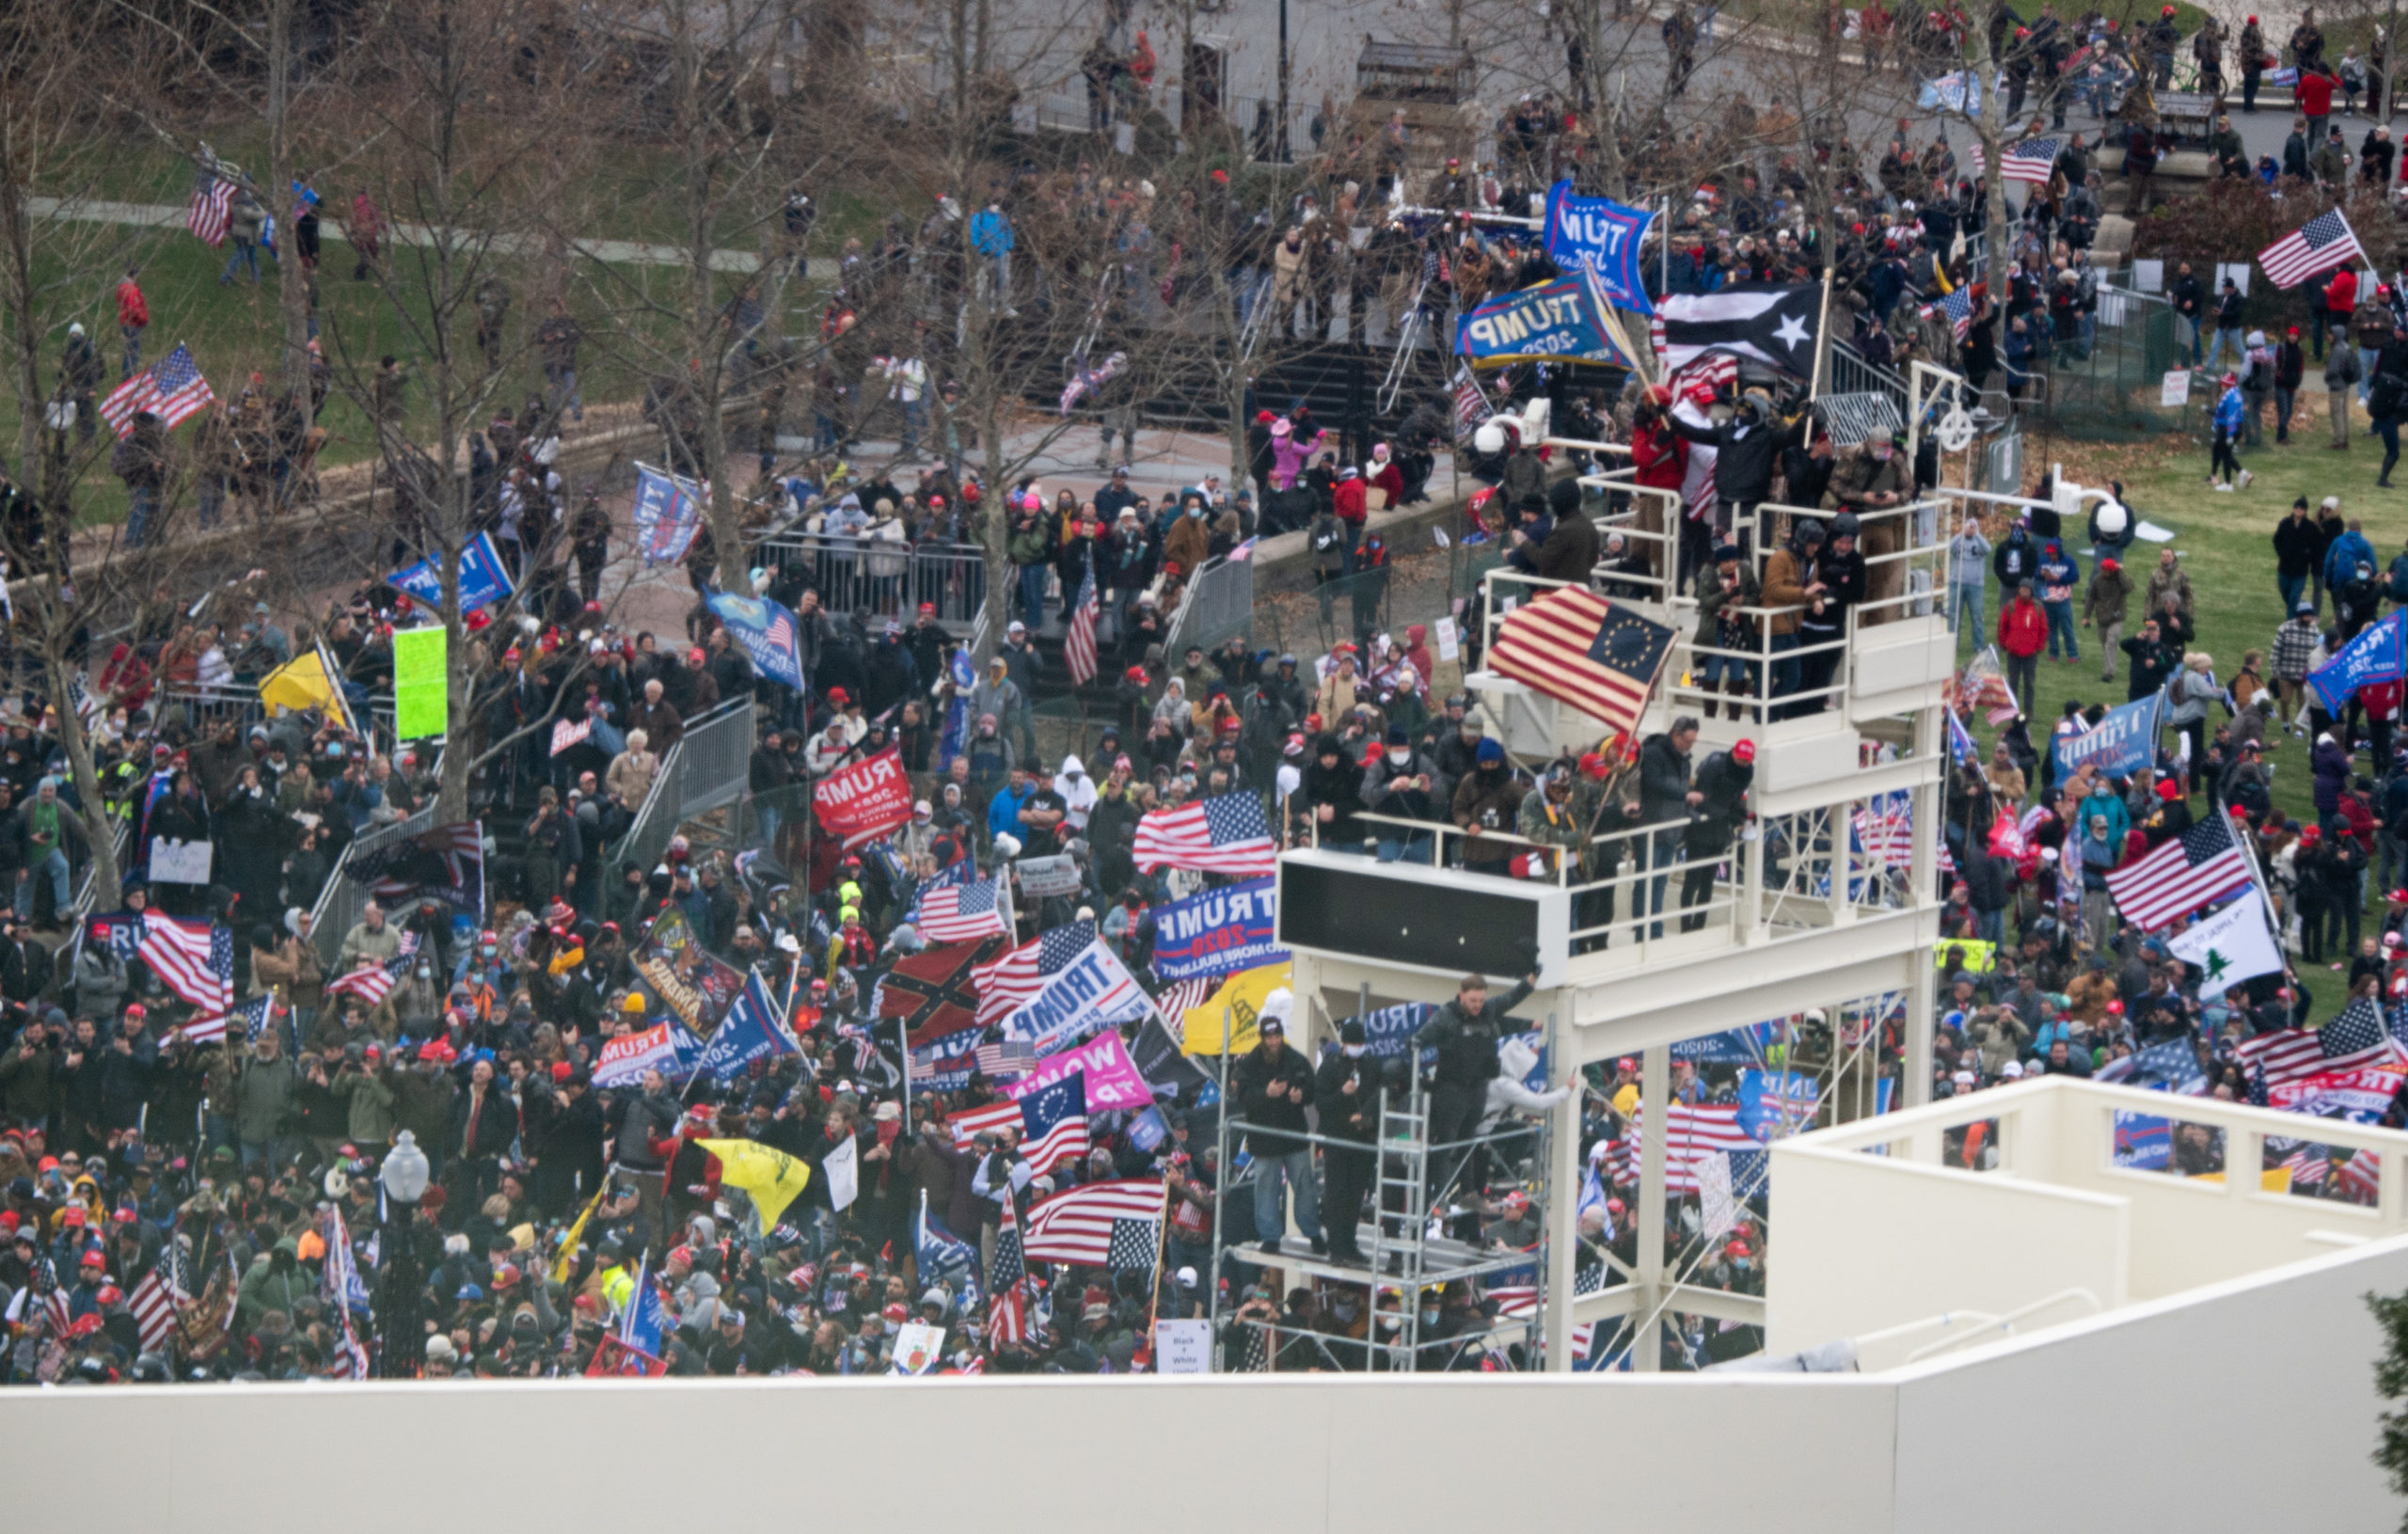 Supporters of US President Donald Trump take over stands set up for the presidential inauguration as they protest at the US Capitol in Washington, DC, January 6, 2021. - Thousands of Trump supporters, fueled by his spurious claims of voter fraud, are flooding the nation's capital protesting the expected certification of Joe Biden's White House victory by the US Congress. (Photo by SAUL LOEB / AFP) (Photo by SAUL LOEB/AFP via Getty Images)